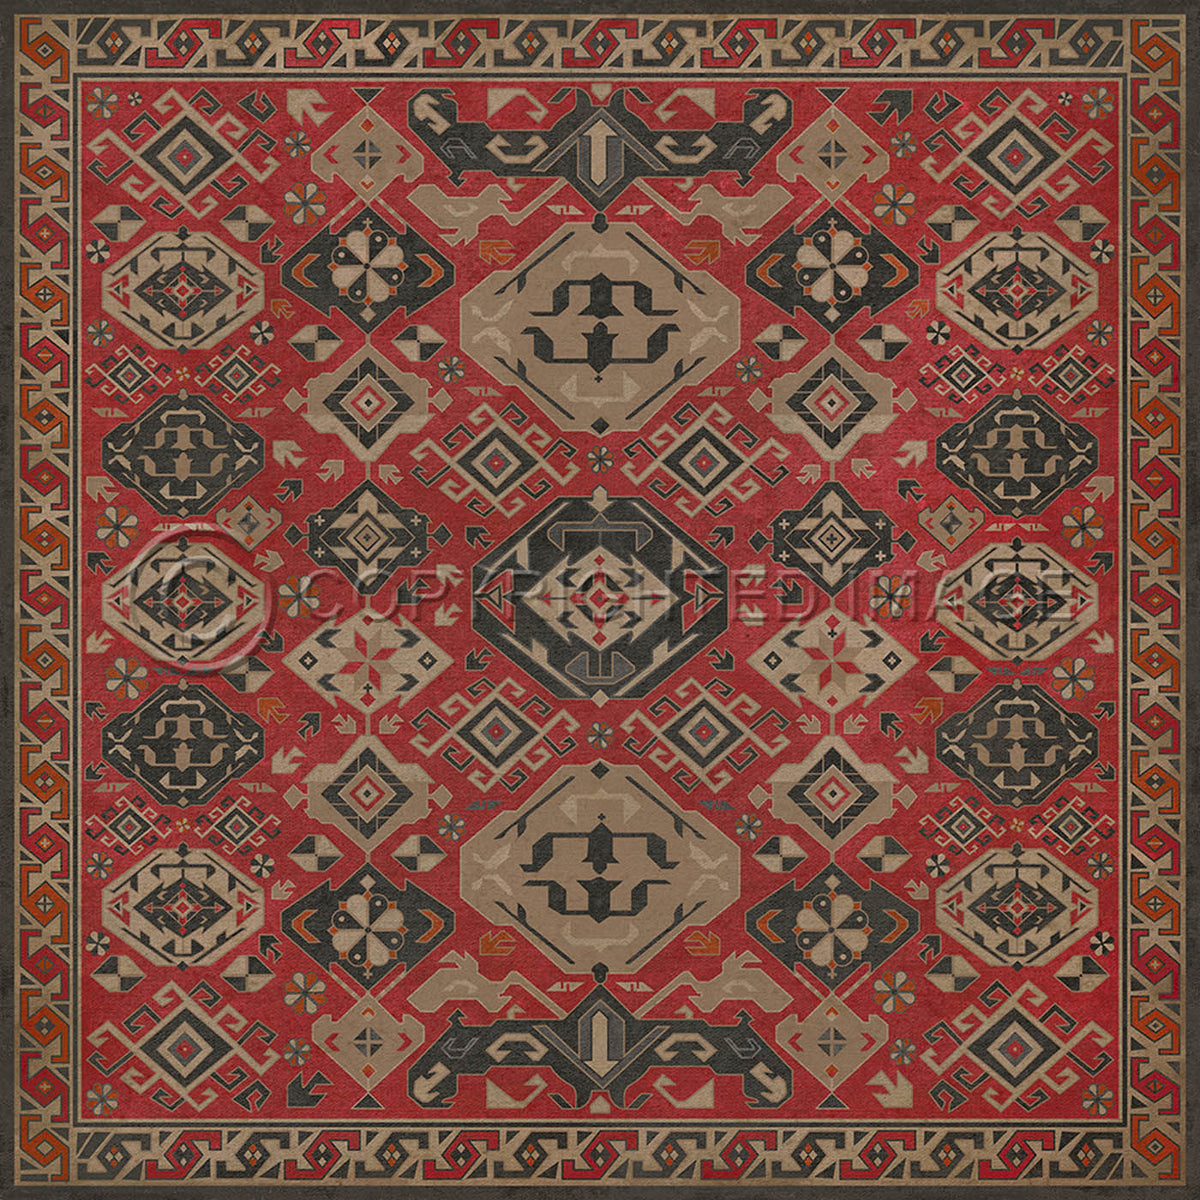 Traditional All Spice 48x48